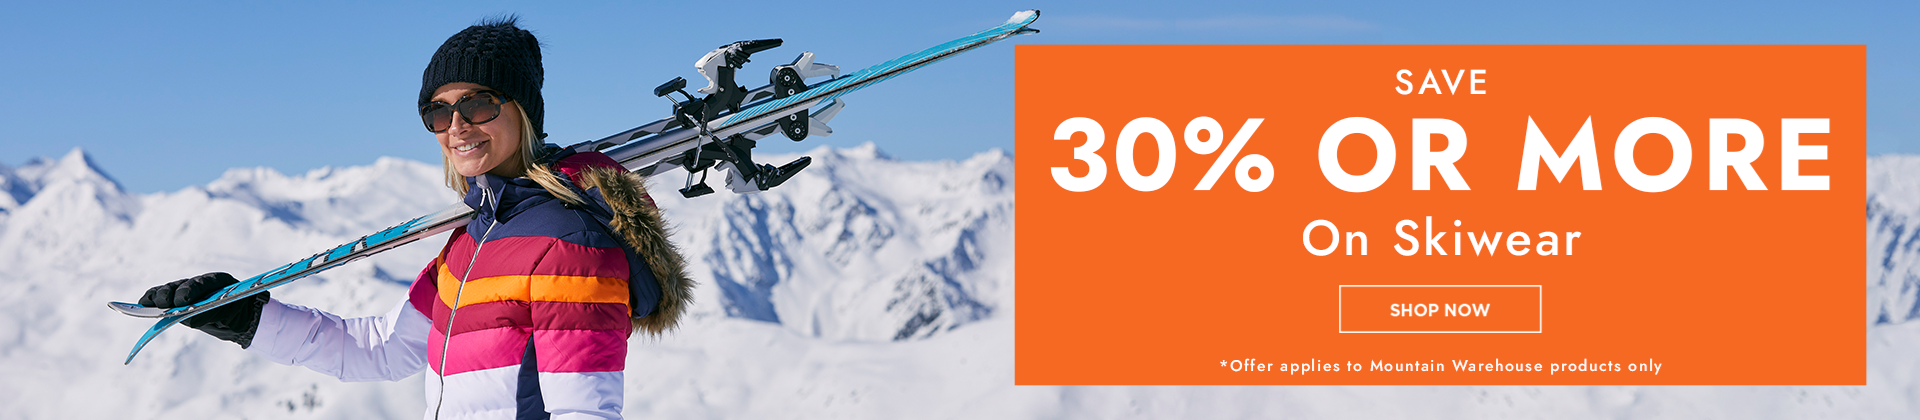 H1: Save 30% Or More On Skiwear